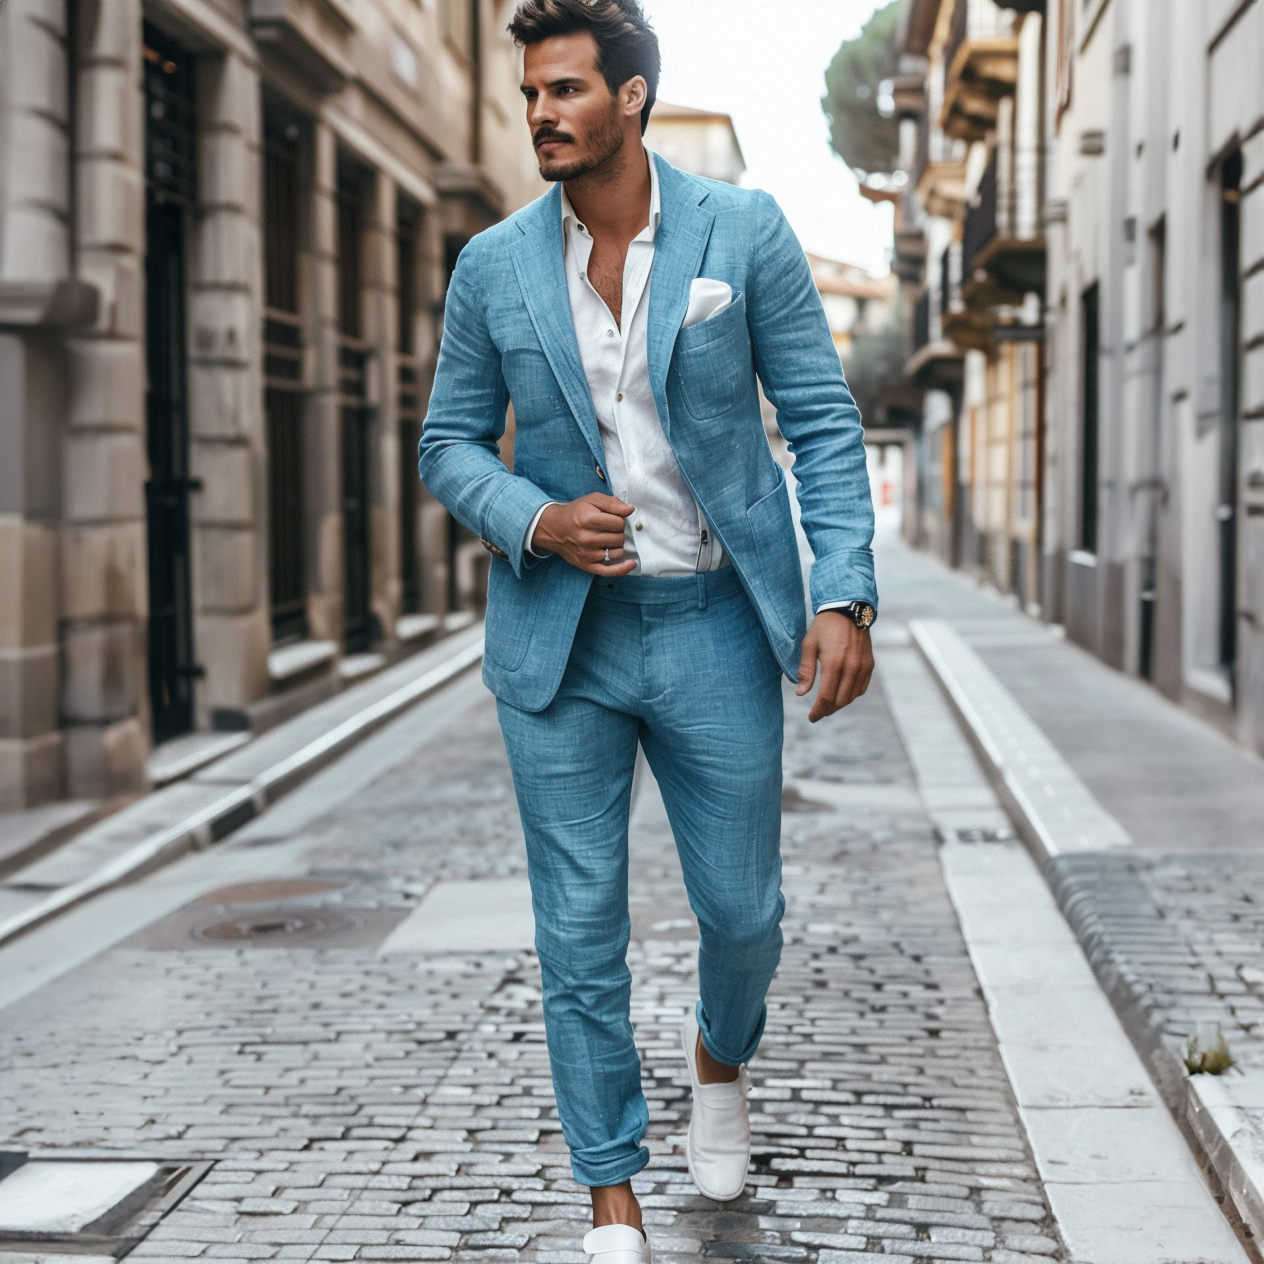 Dressing for Summer Events: Men's Style Guide